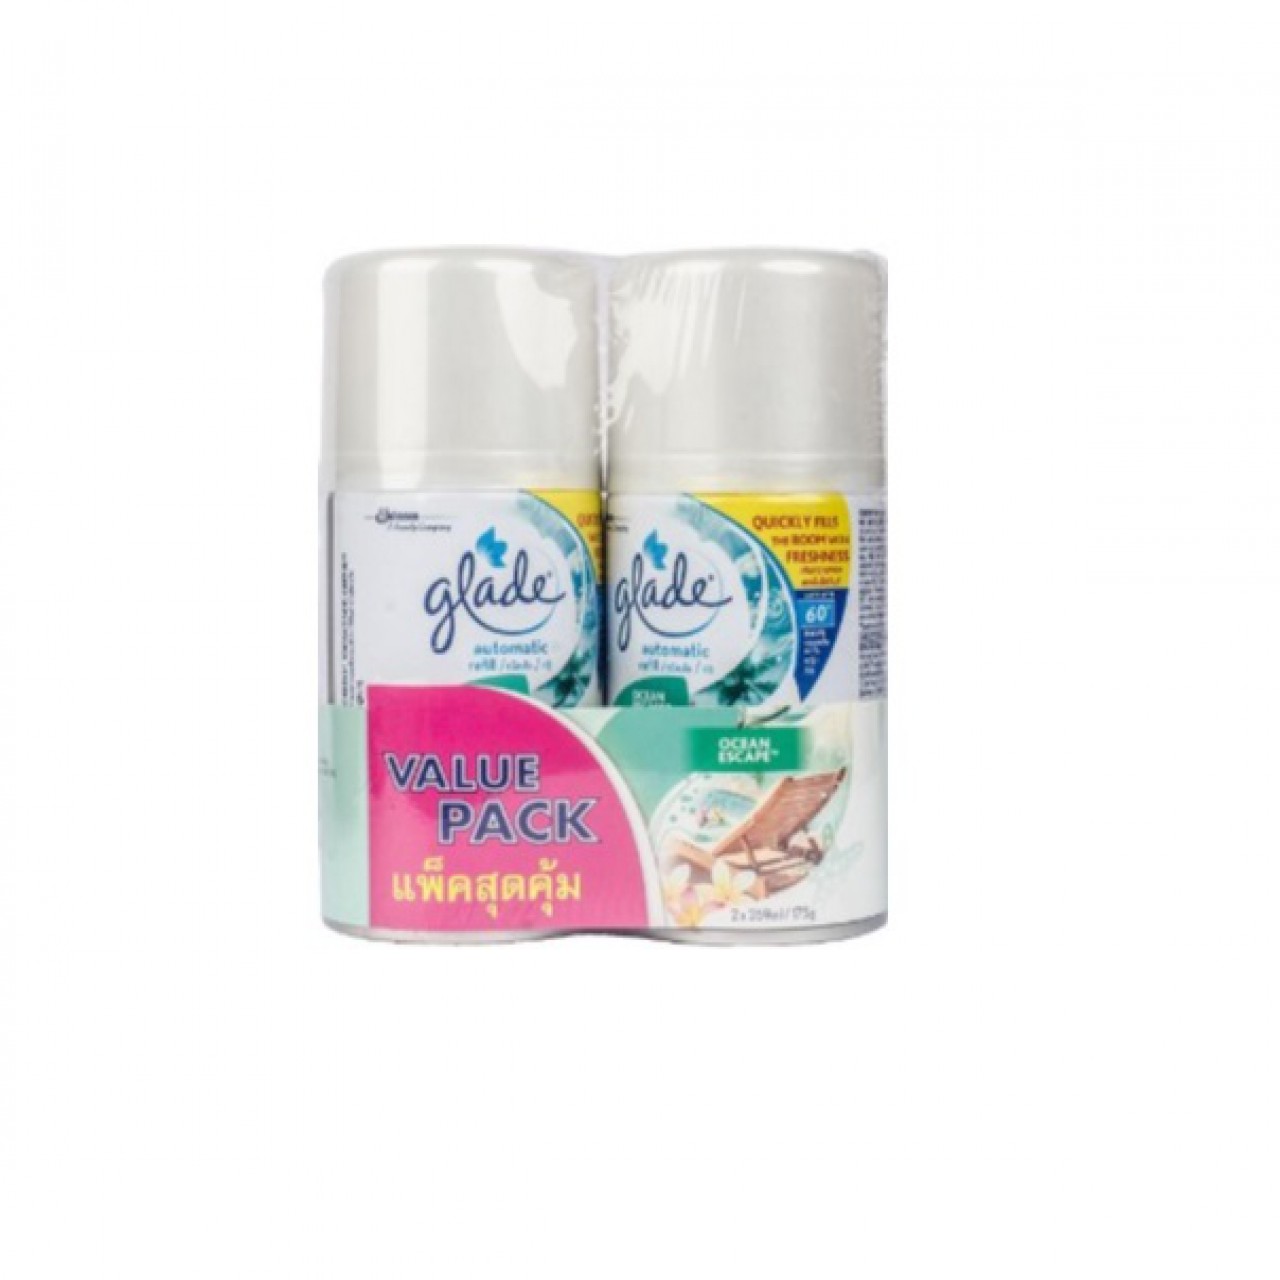 GLADE AUTOMATIC SPRAY VALUE PACK OCEAN ESCAPE REFILL 175G